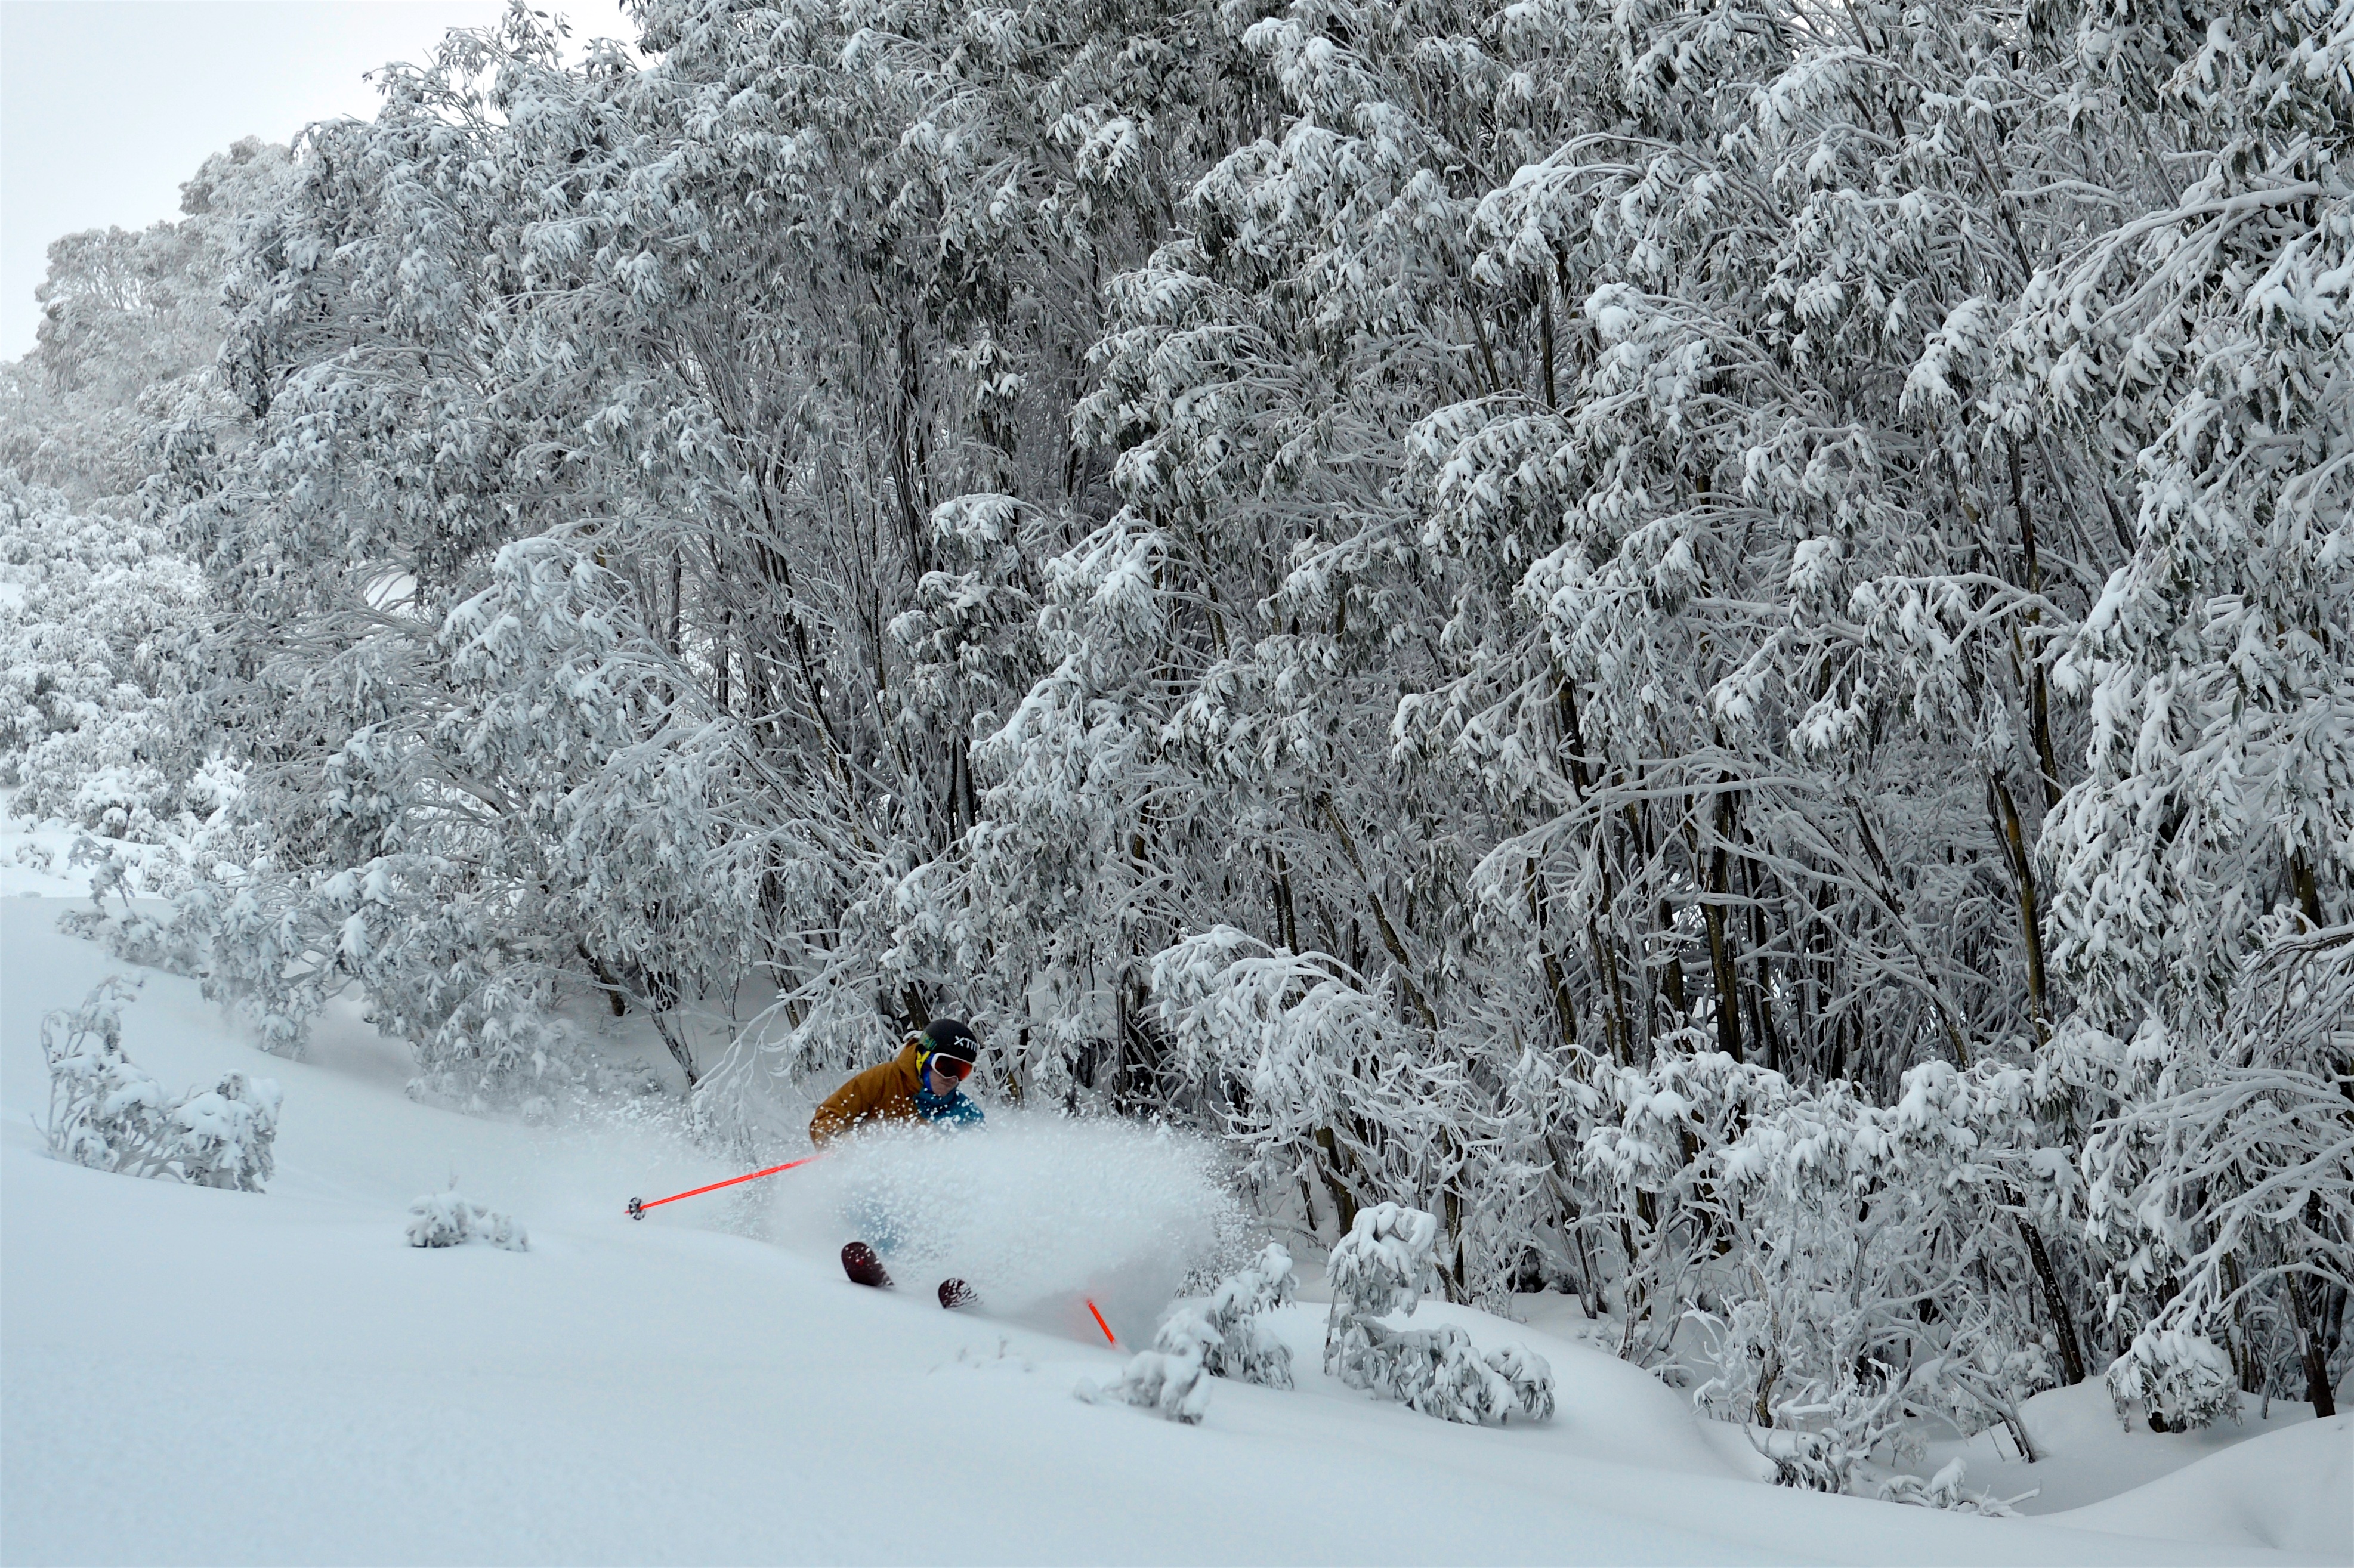 Here's Sam Perry (Insty @samskis1) in 10 inches (24cm) of powder at Falls Creek (@fallsaustralia) today. Pic by Chris Hocking (FB Hocking Images) Insty @hockster111